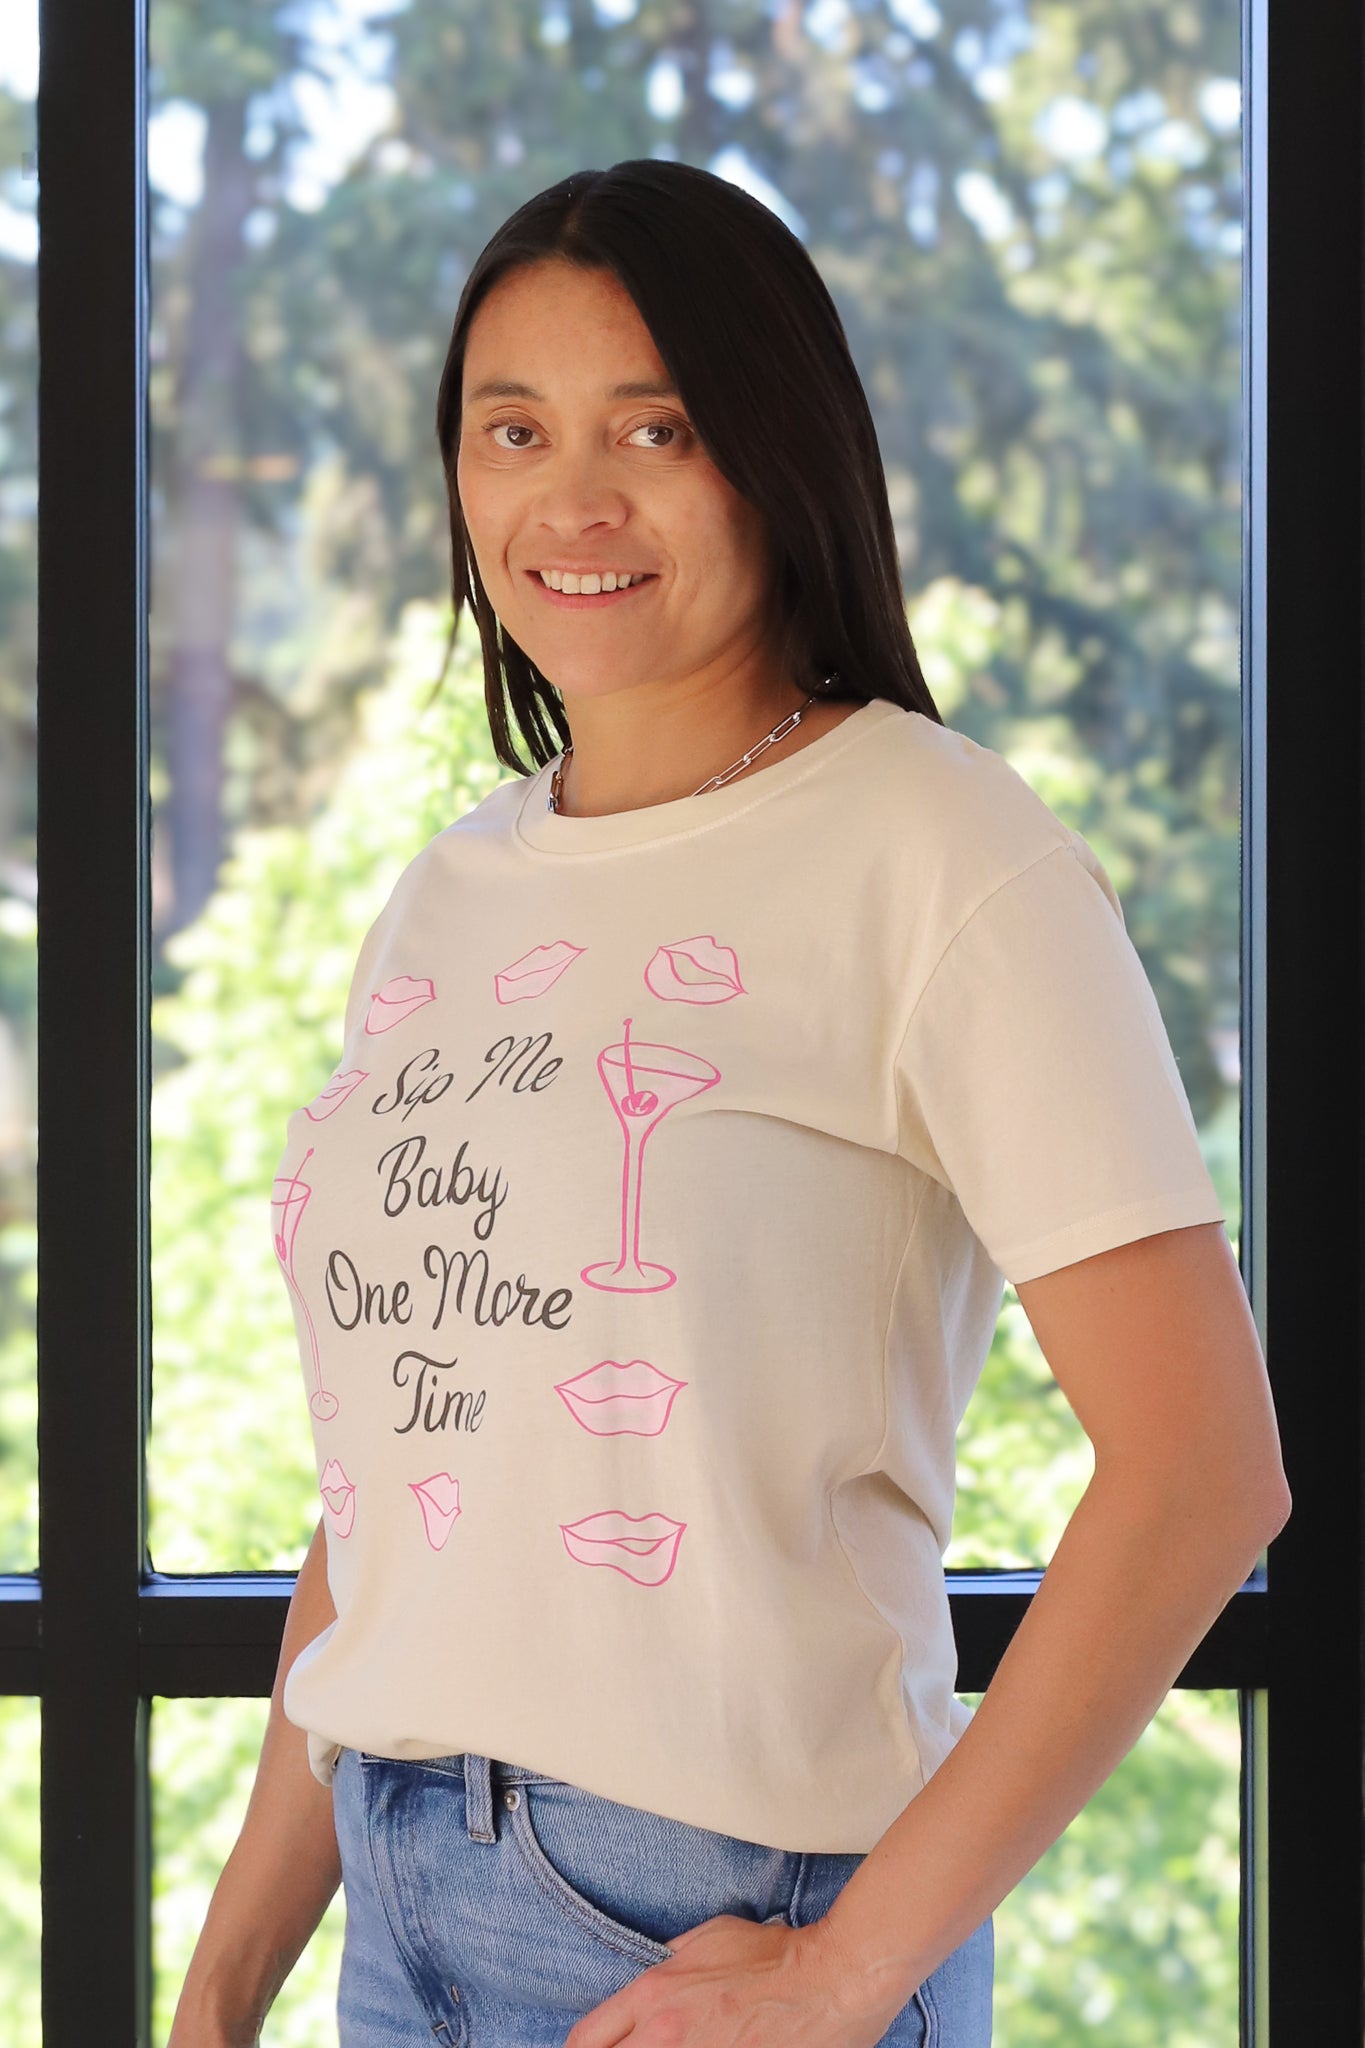 PROJECT SOCIAL T Sip Me Baby Tee